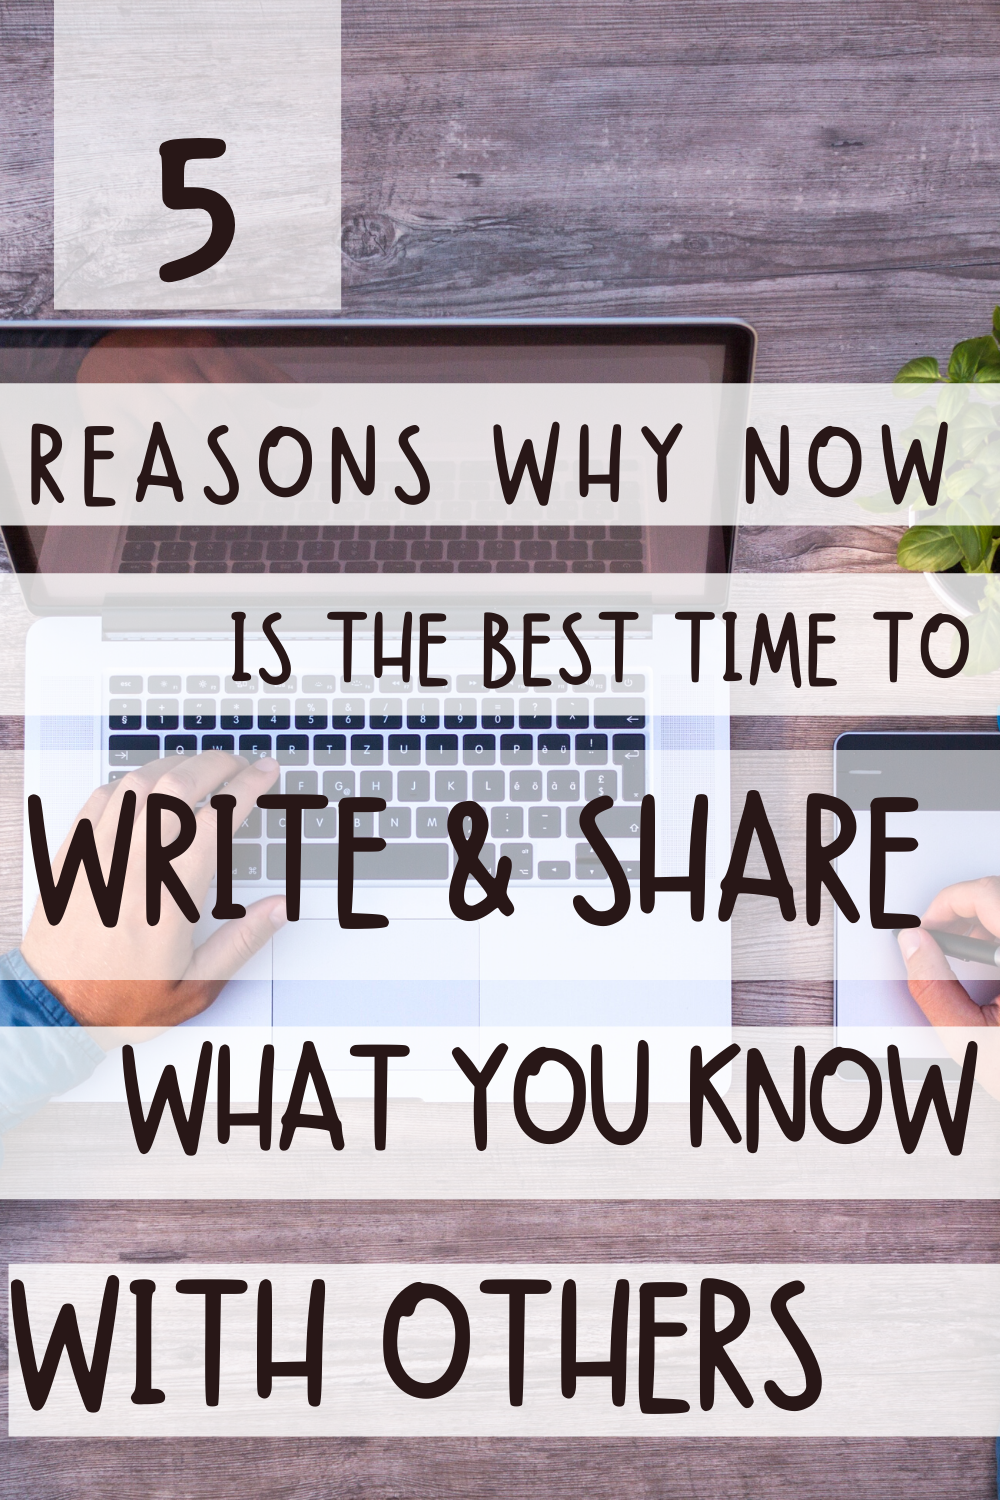 5 Reasons Now is the Best Time to Write and Share 4